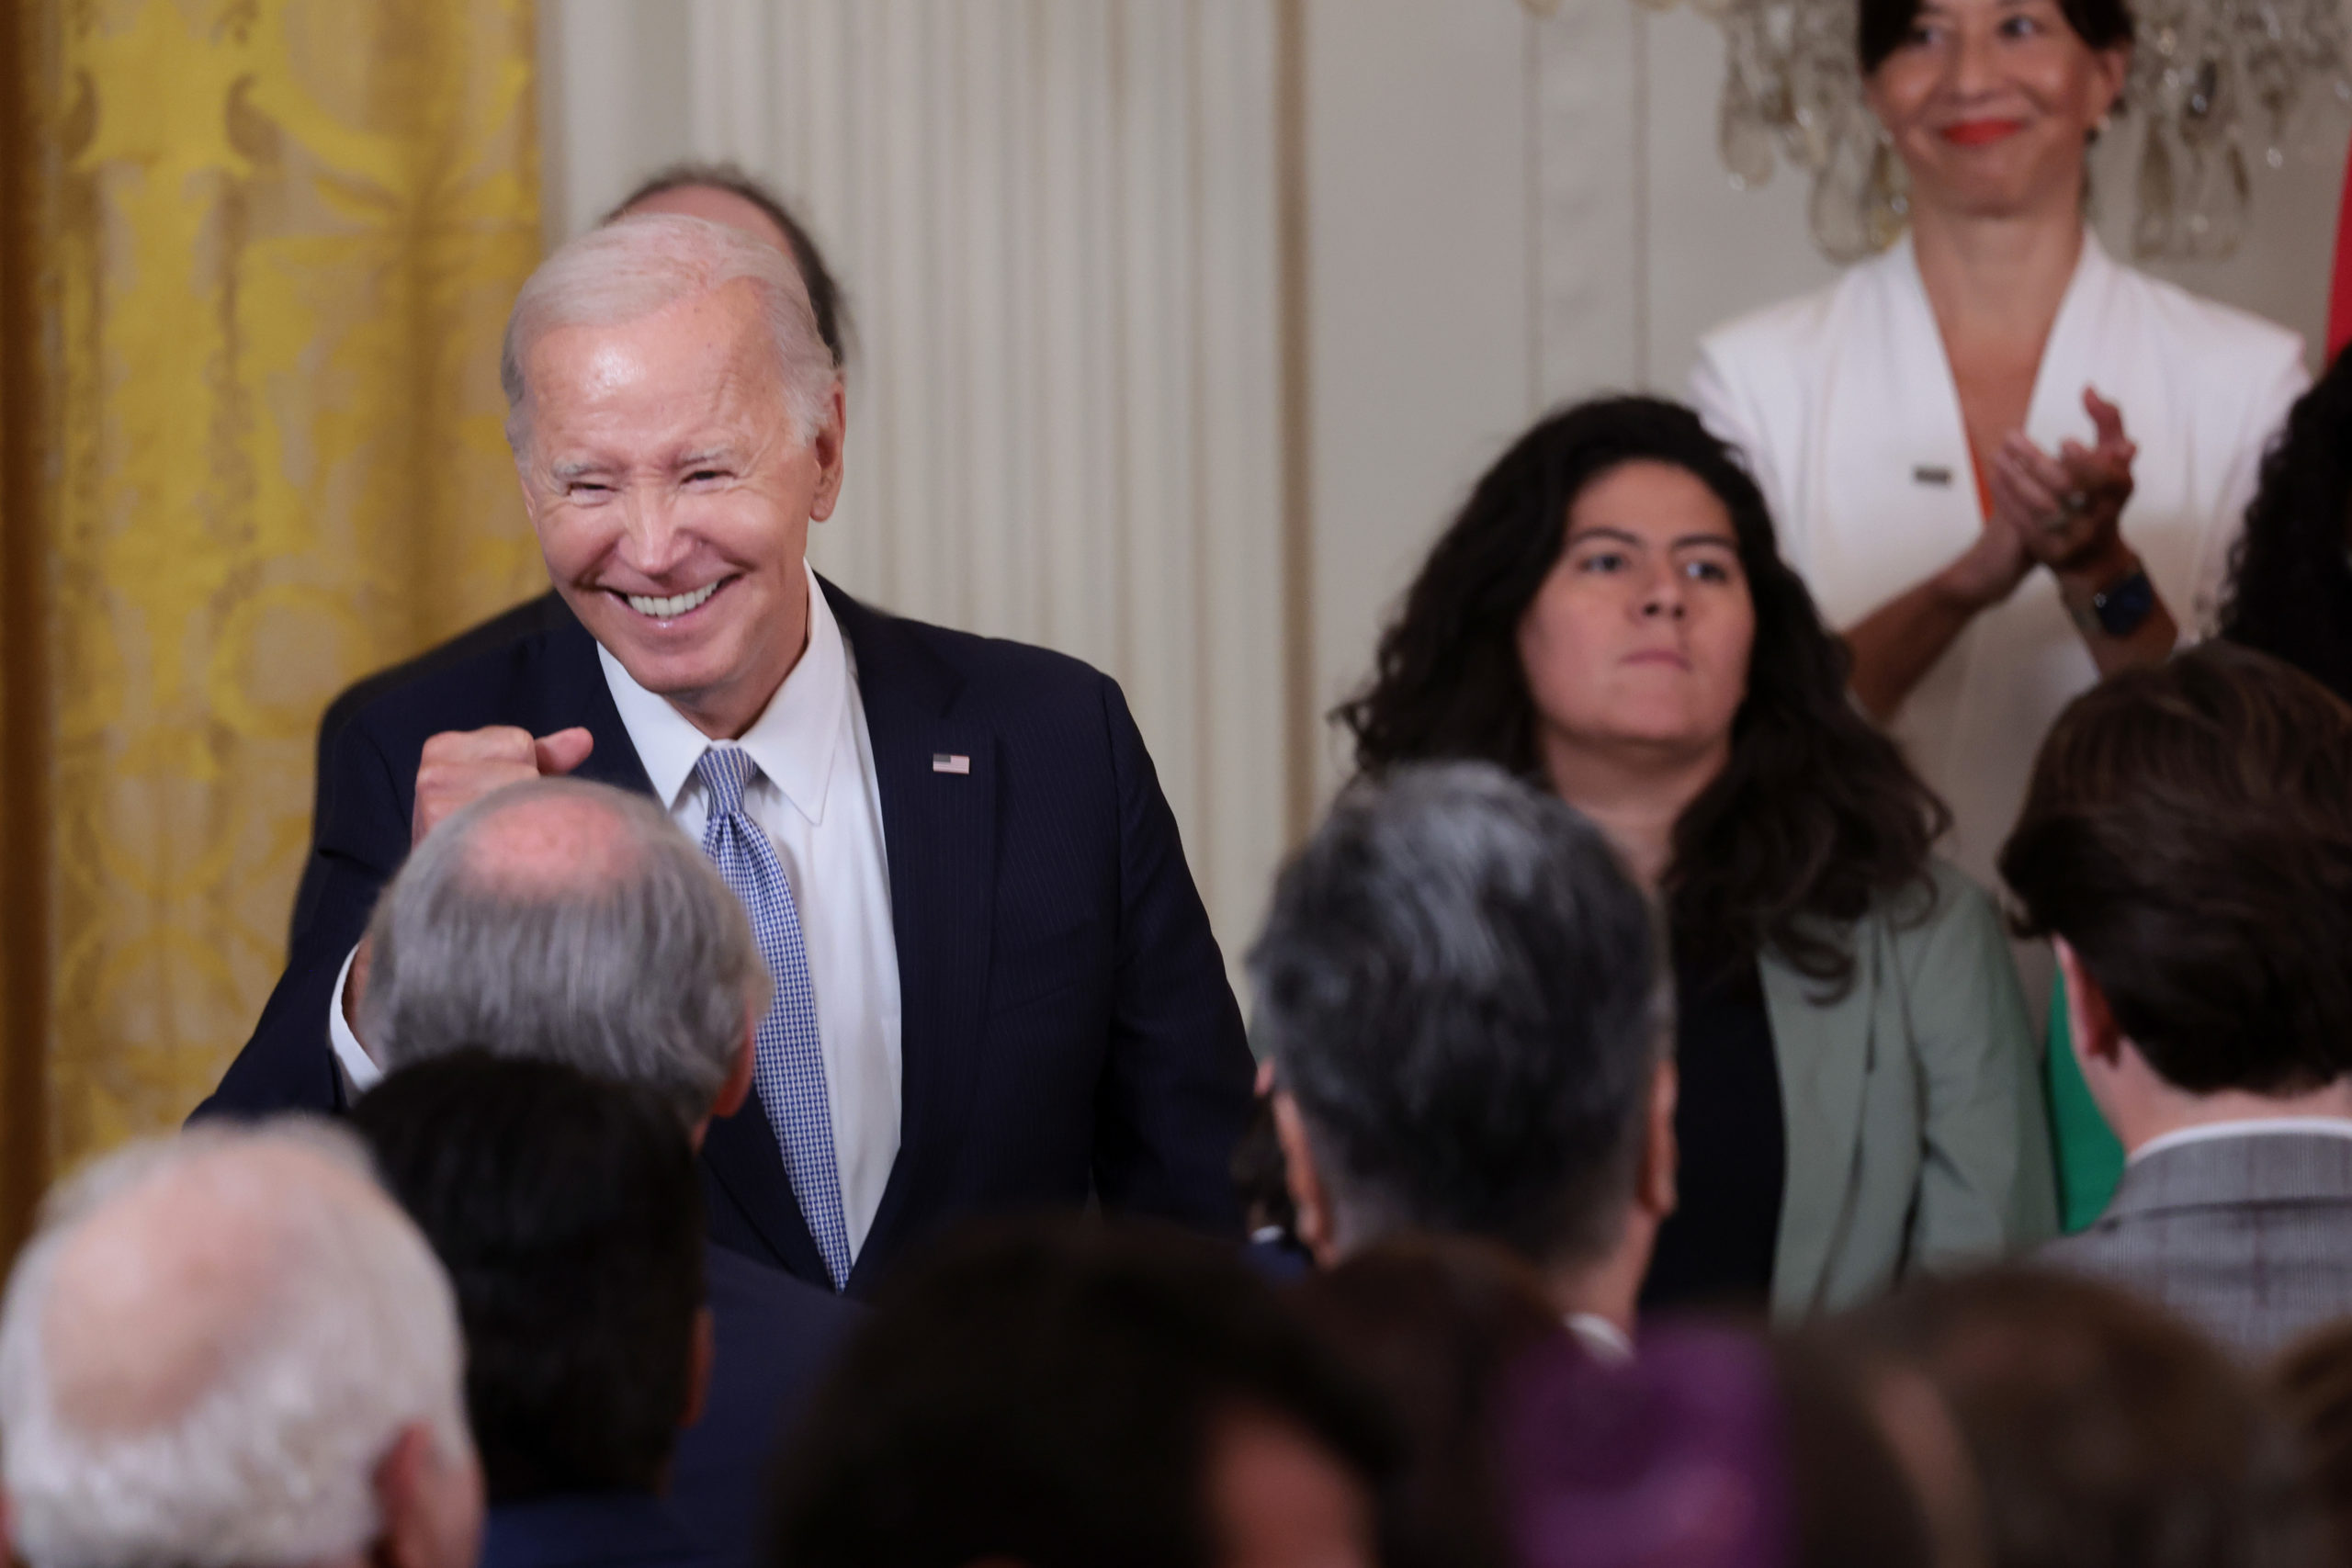 WASHINGTON, DC - AUGUST 16: U.S. President Joe Biden greets audience members during an event recognizing the first anniversary of the Inflation Reduction Act in the East Room at the White House on August 16, 2023 in Washington, DC. The Inflation Reduction Act aims to curb inflation by reducing the federal government budget deficit, lowering prescription drug prices, and investing into clean domestic energy programs. (Photo by Win McNamee/Getty Images)